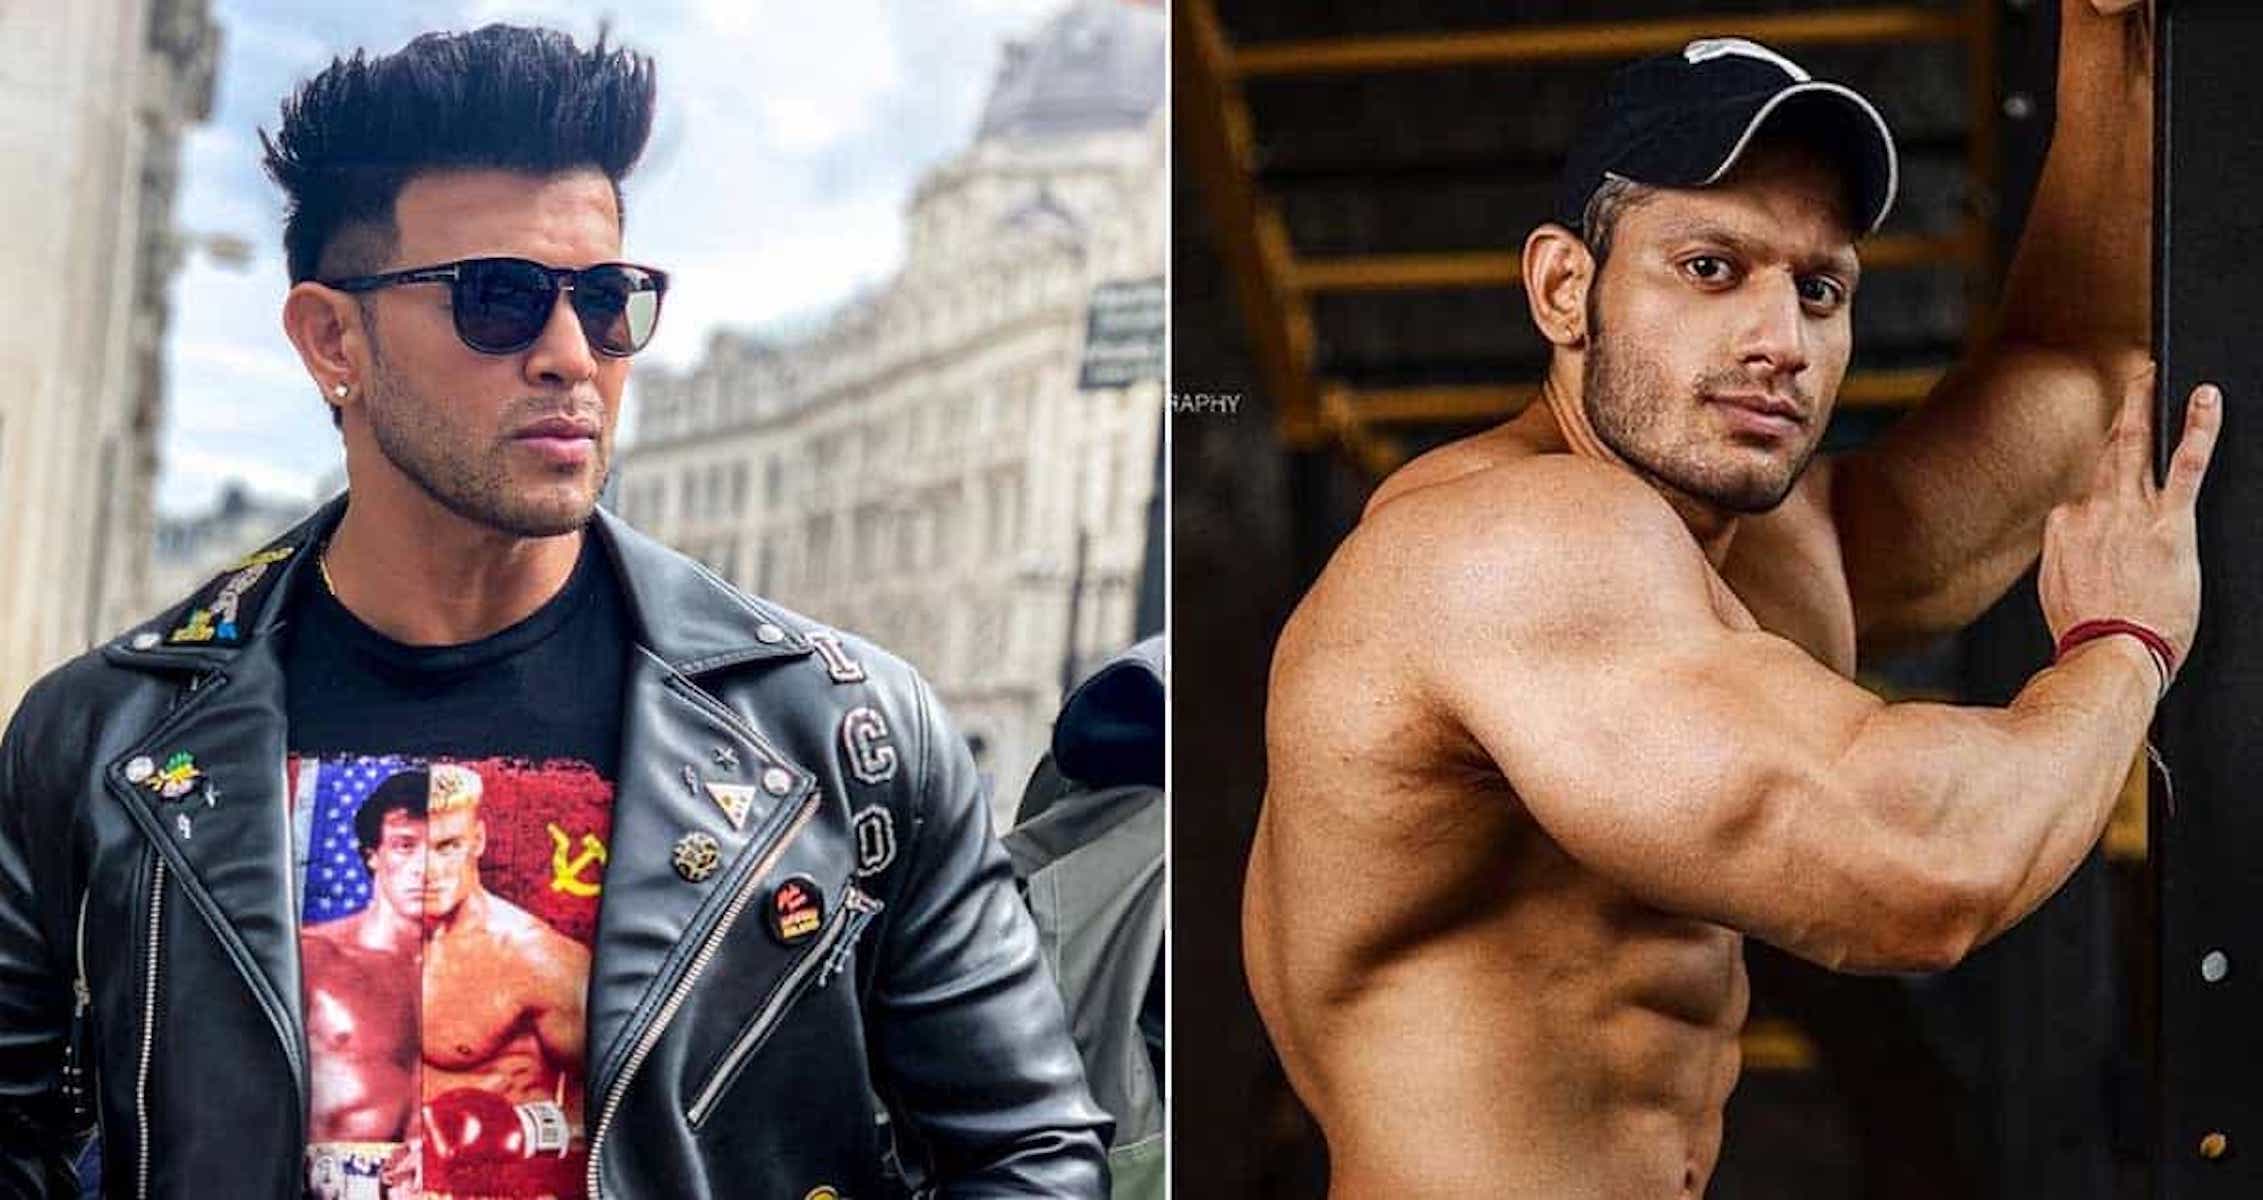 Former Mr. India Manoj Patil Attempted Suicide, Mentioned Harassment By Sahil Khan In Letter